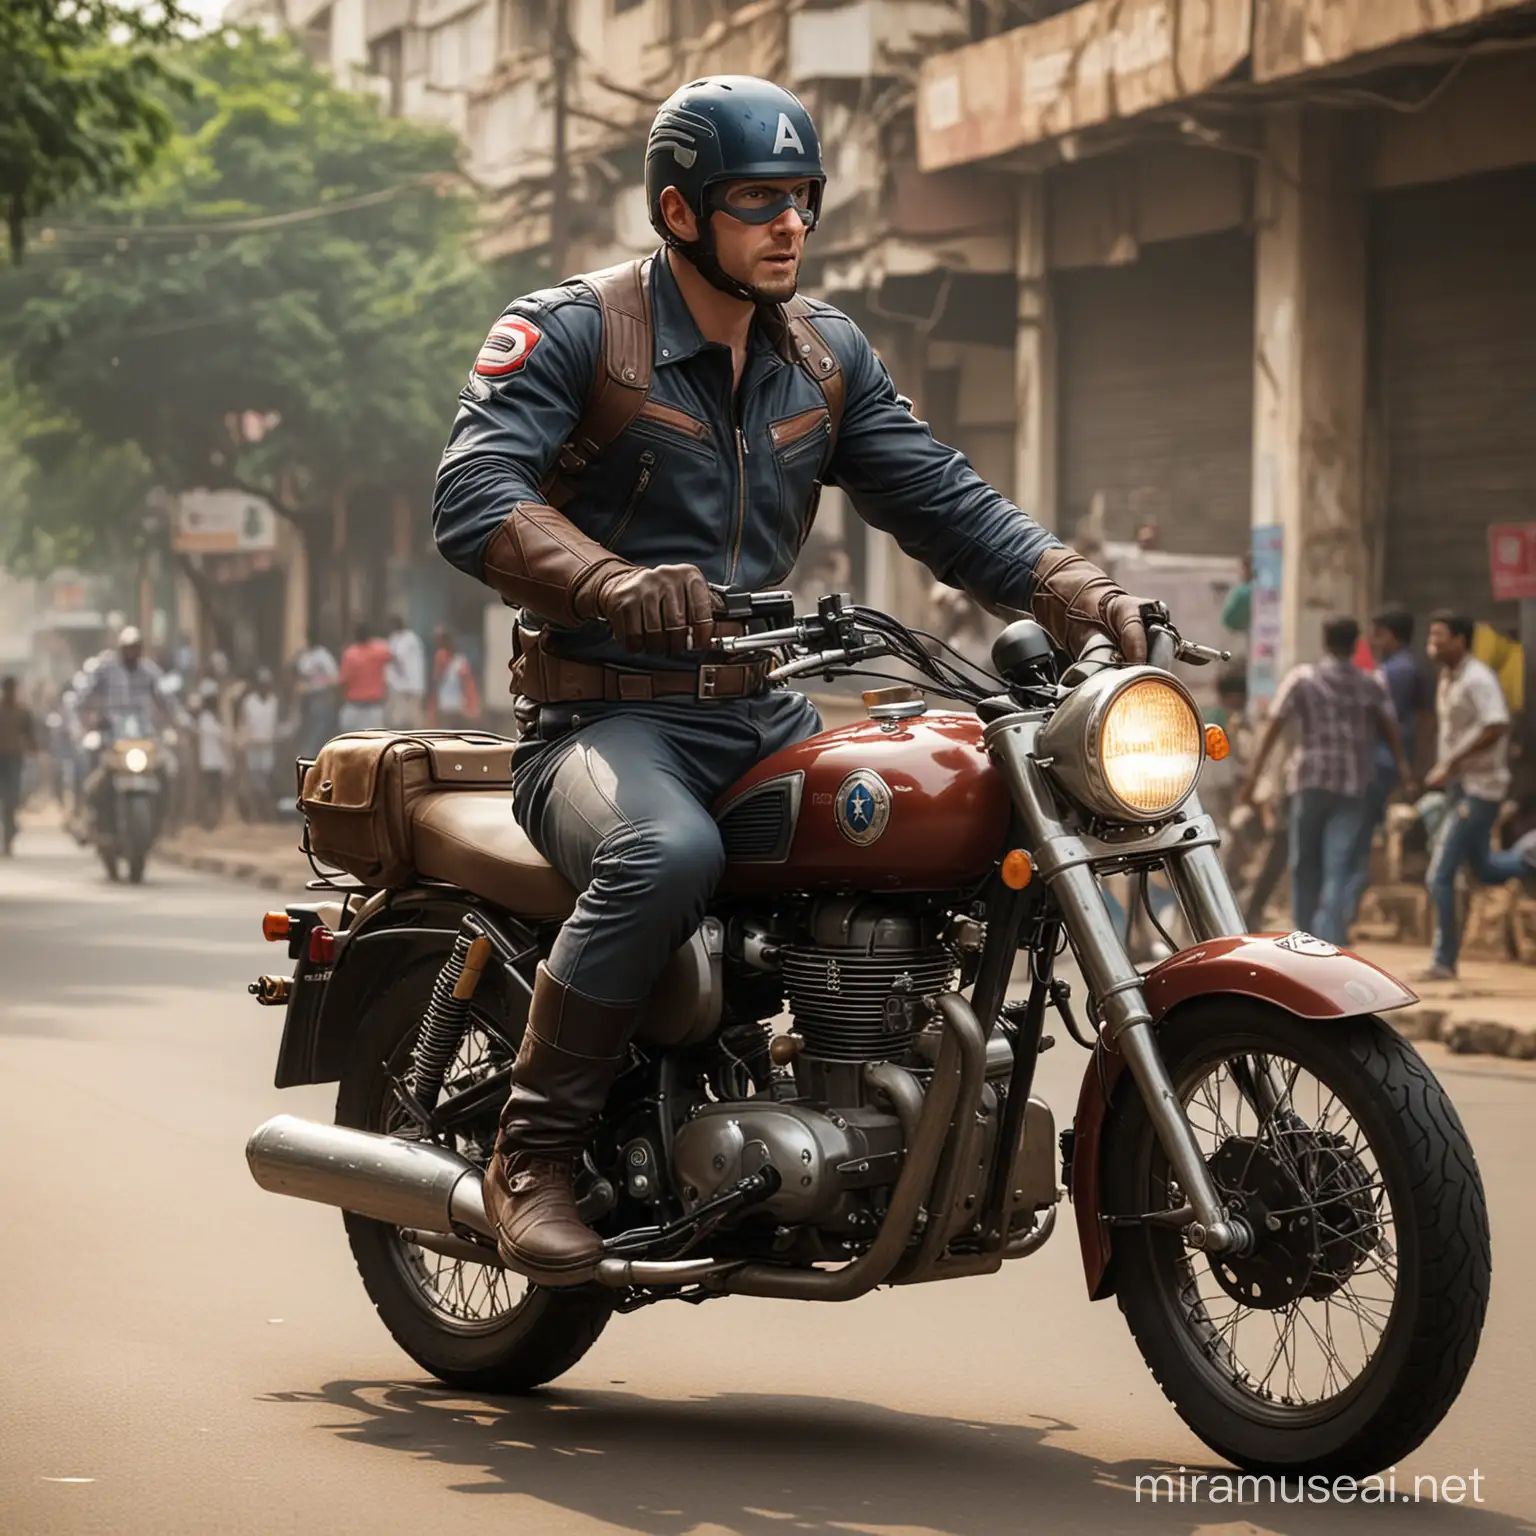 Captain America Riding a Royal Enfield Hunter 350 in streets of Bengaluru